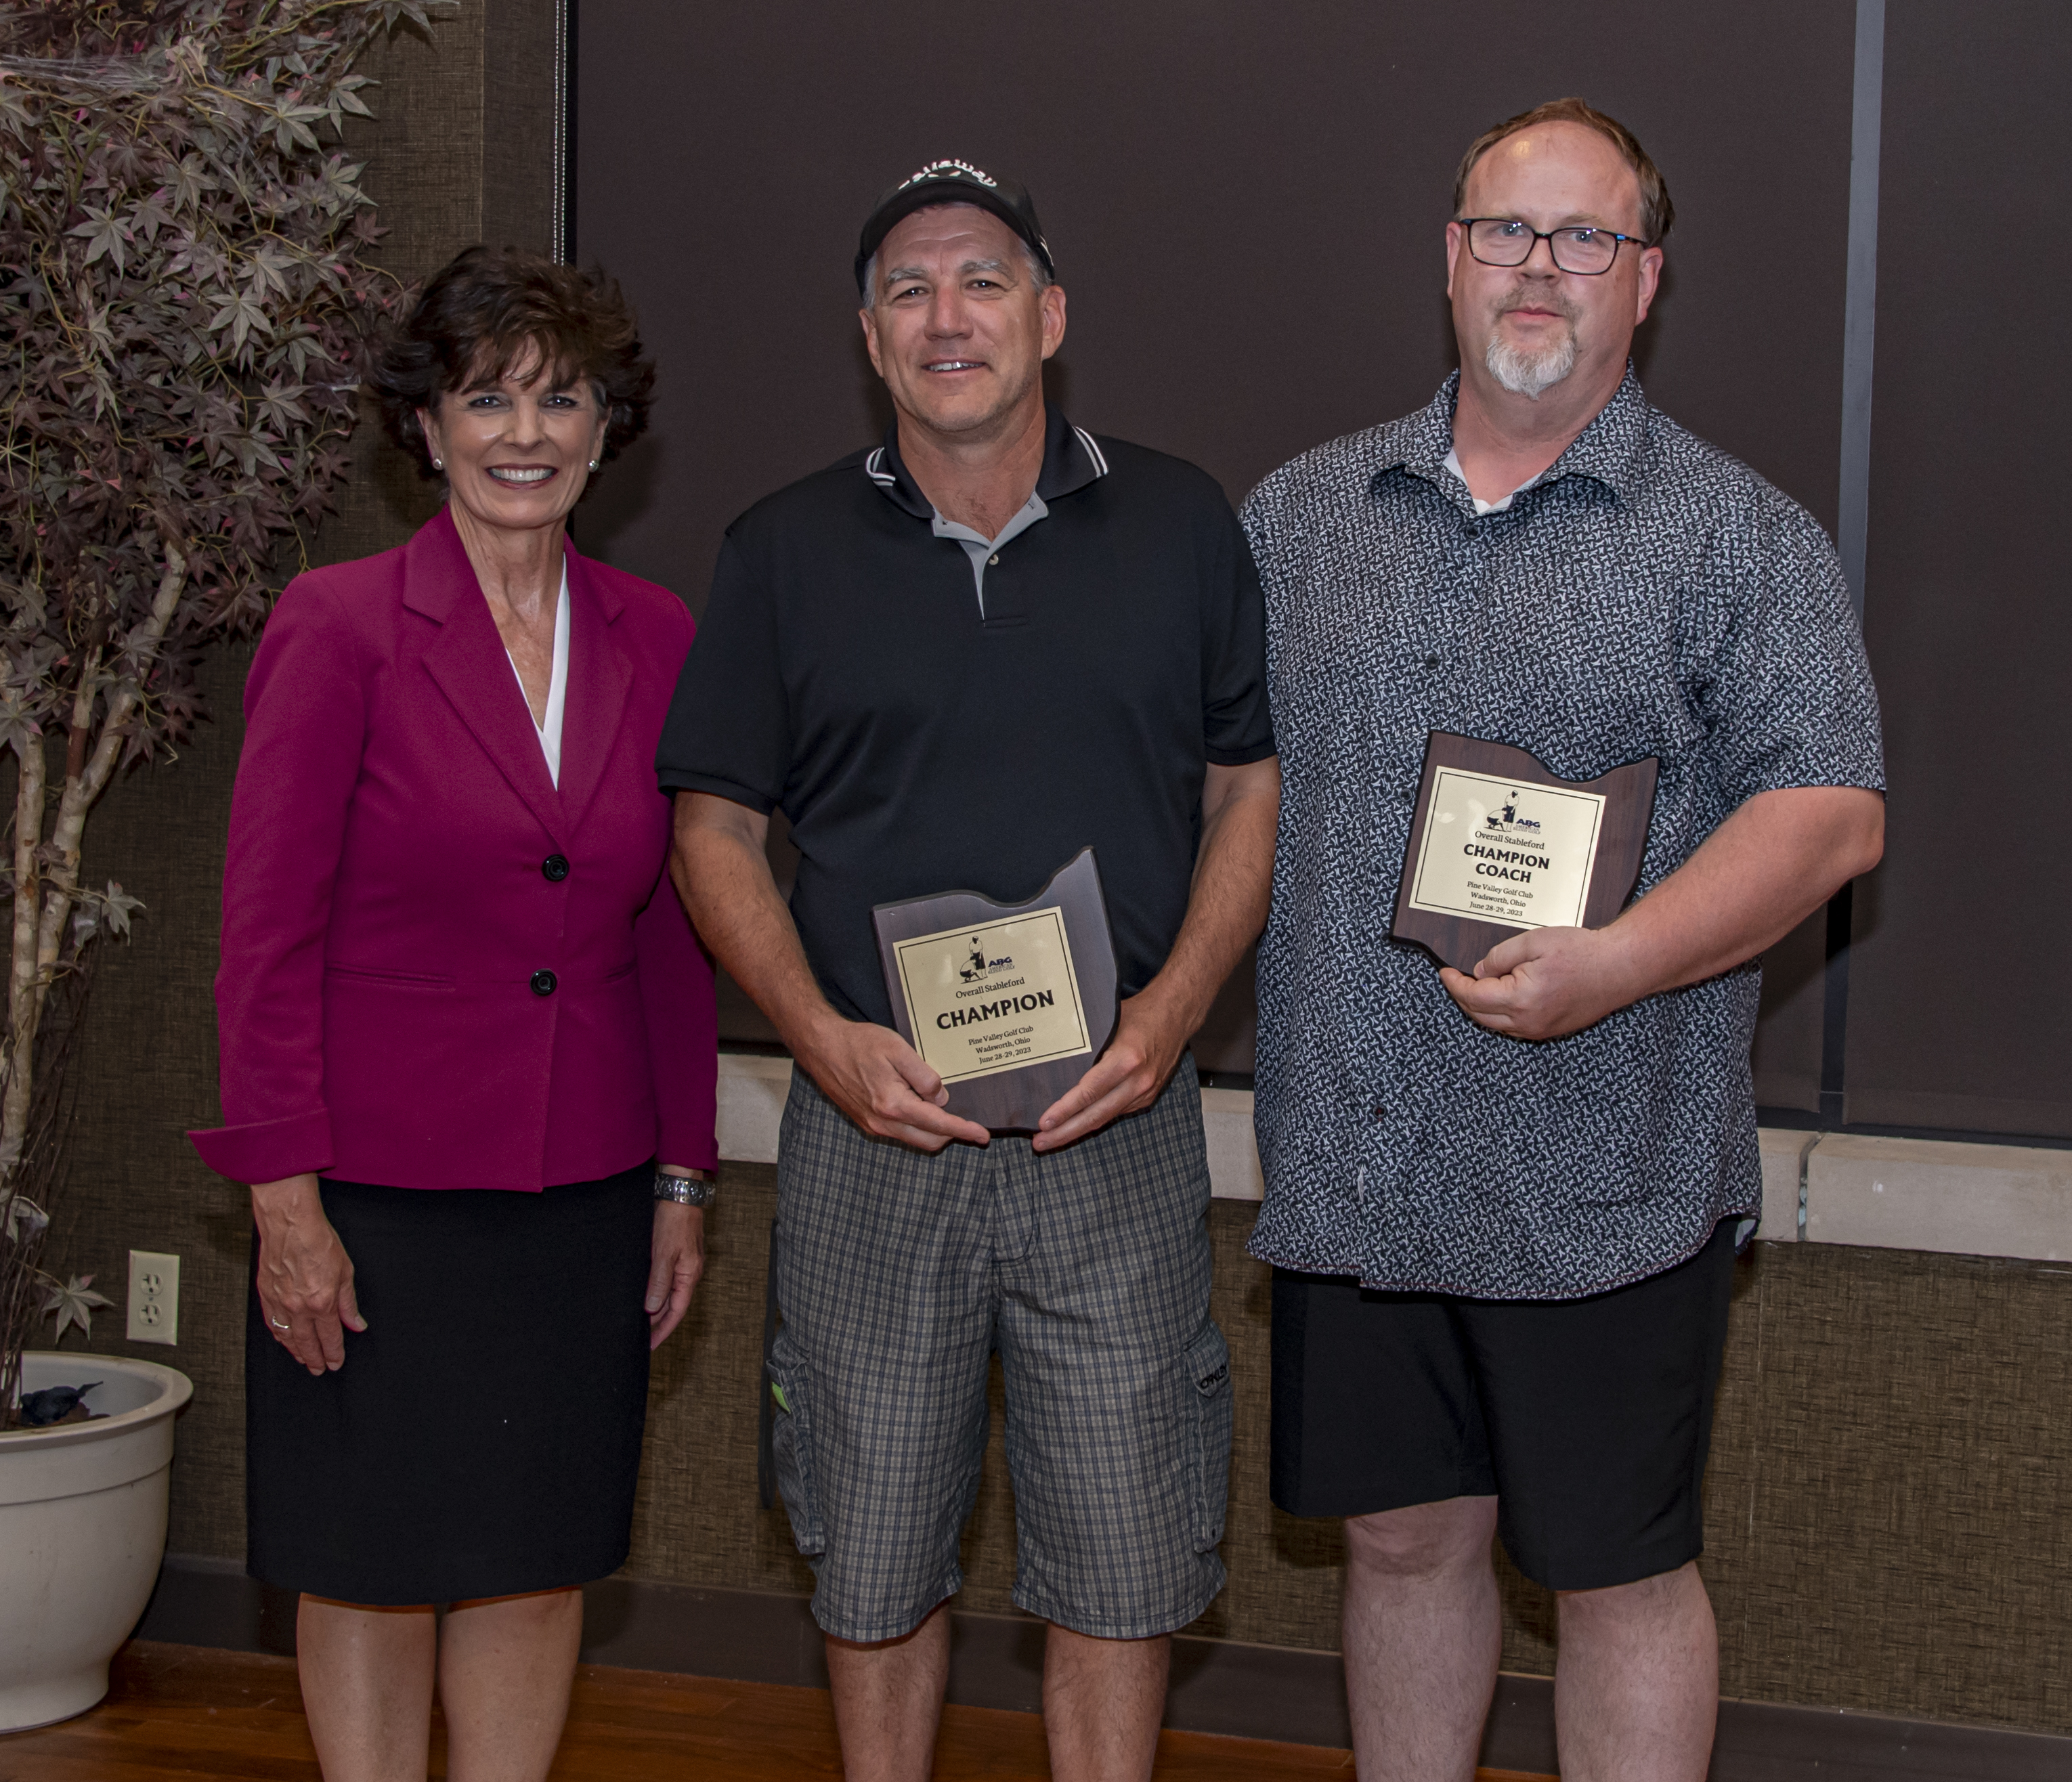 From left to right: Mayor Laubaugh, Coach Steve Duff & Stableford Champion Rick Kush